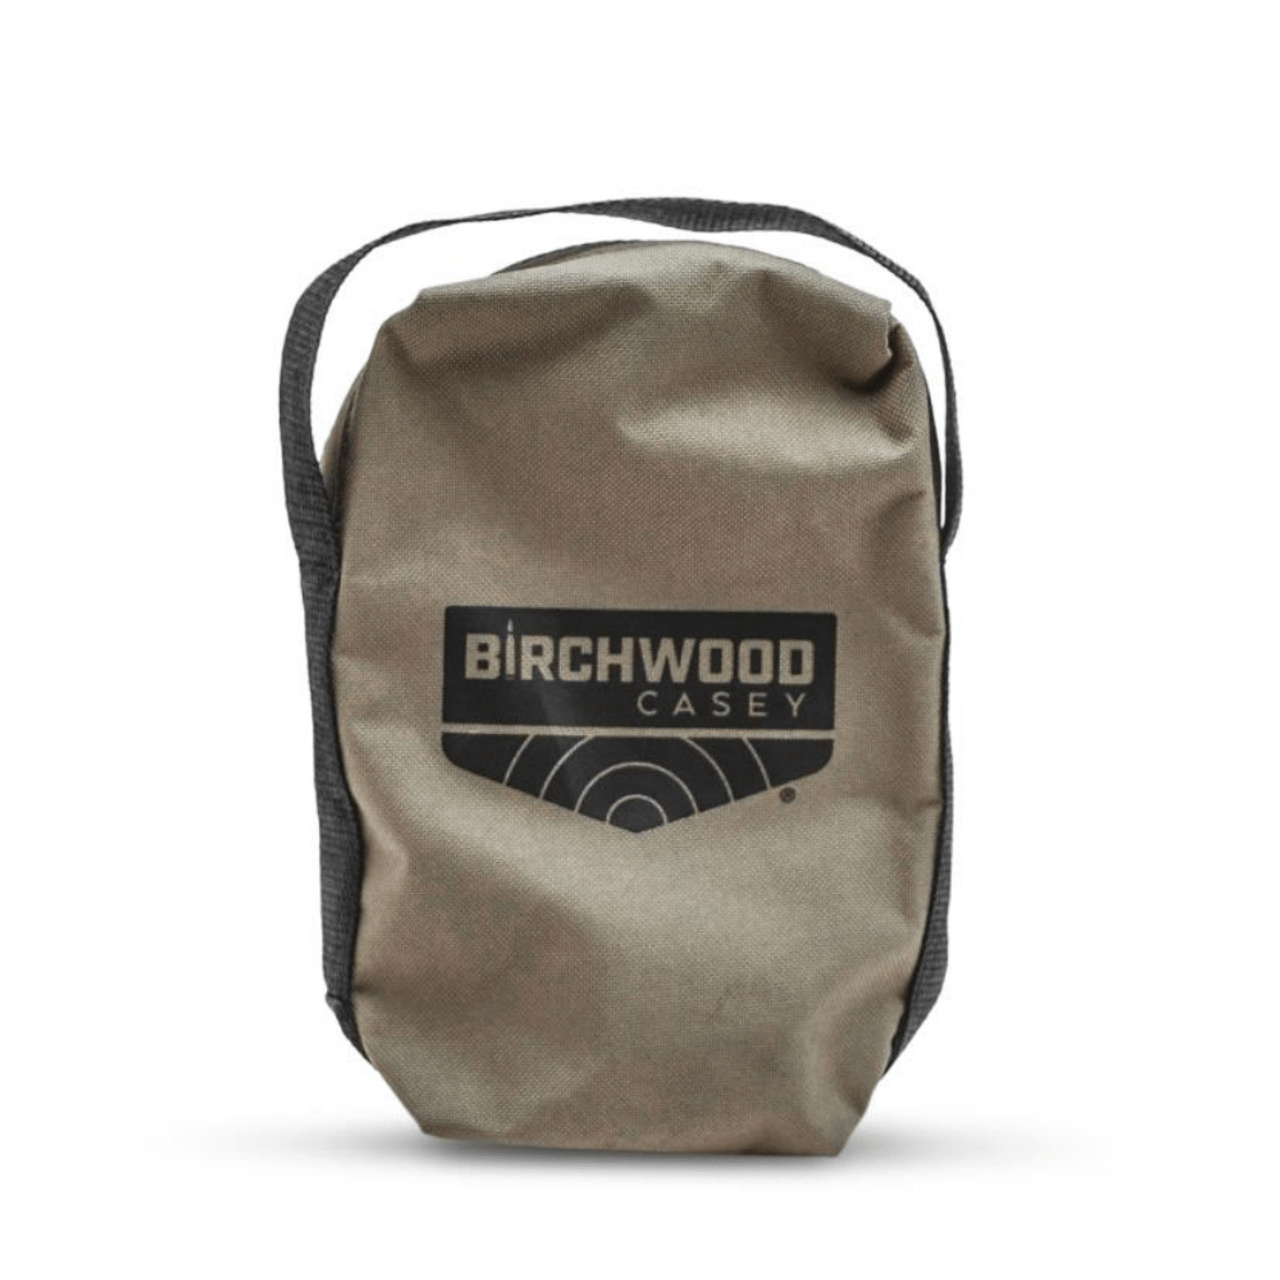 Birchwood Casey Shooting Rest Weight Bags - 4 Pack BC-SRWB-4PK - Shooting Accessories